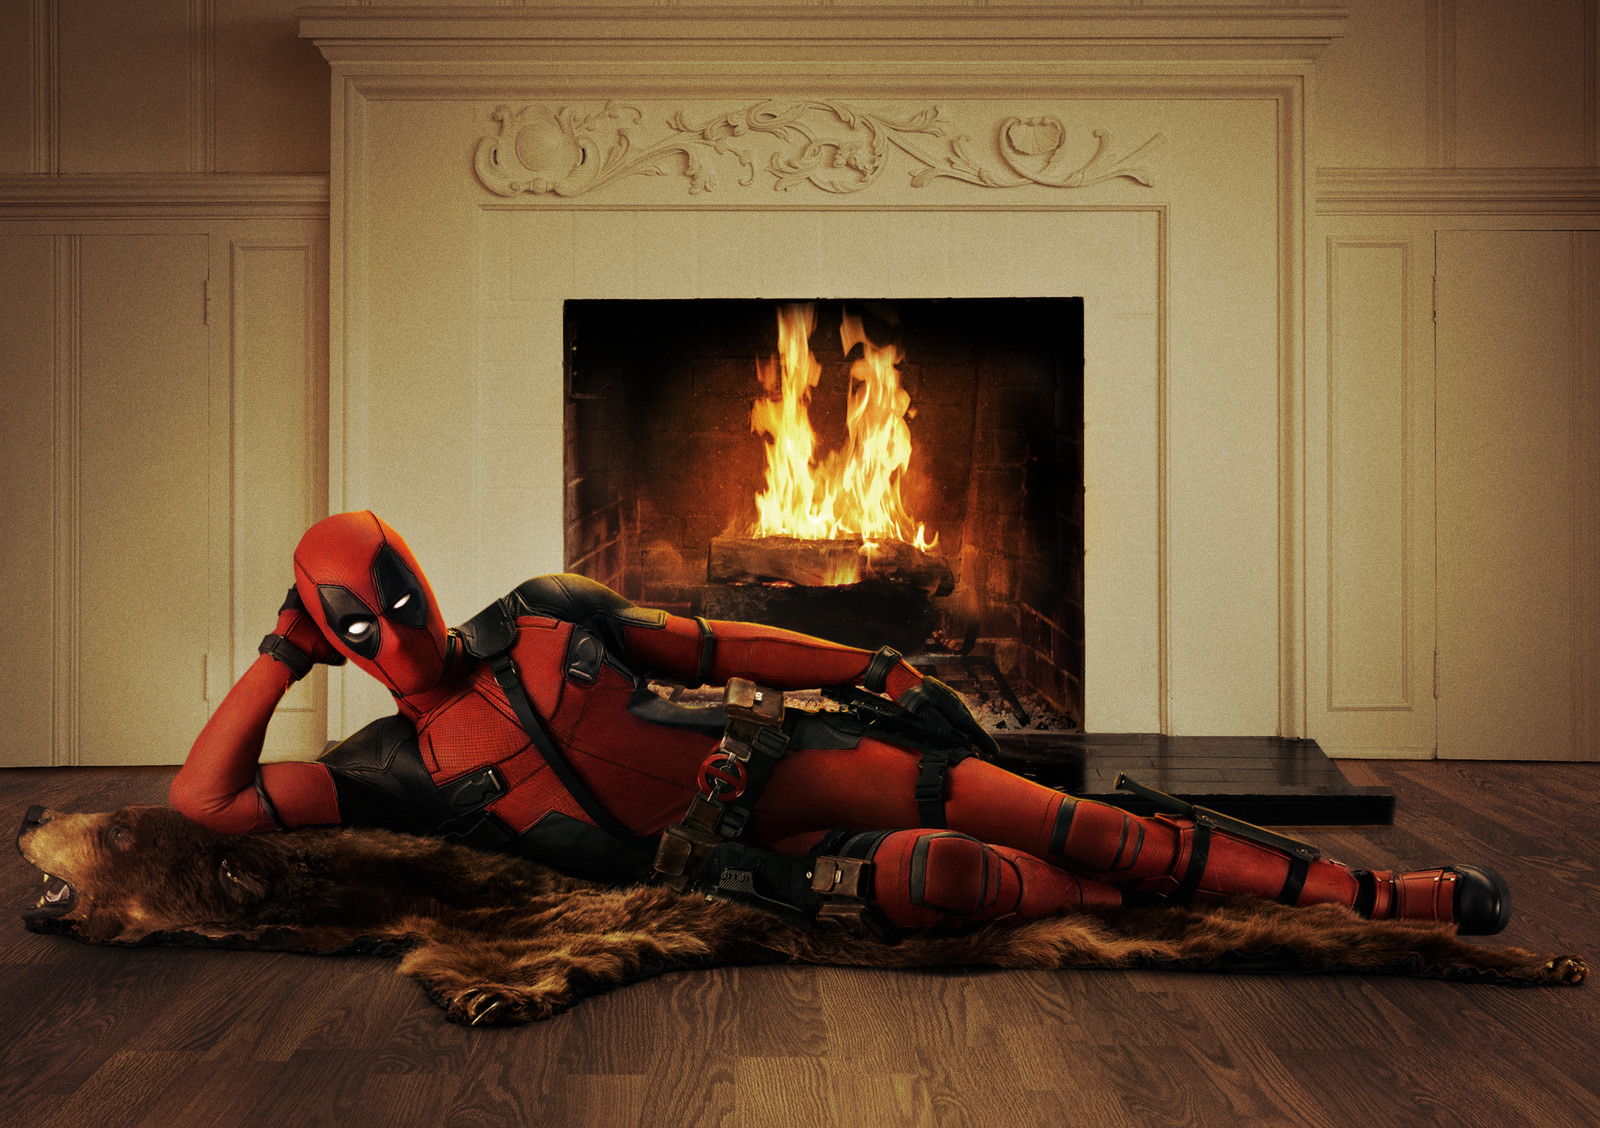 Our First Look at the Deadpool Movie is Oh So Seductive